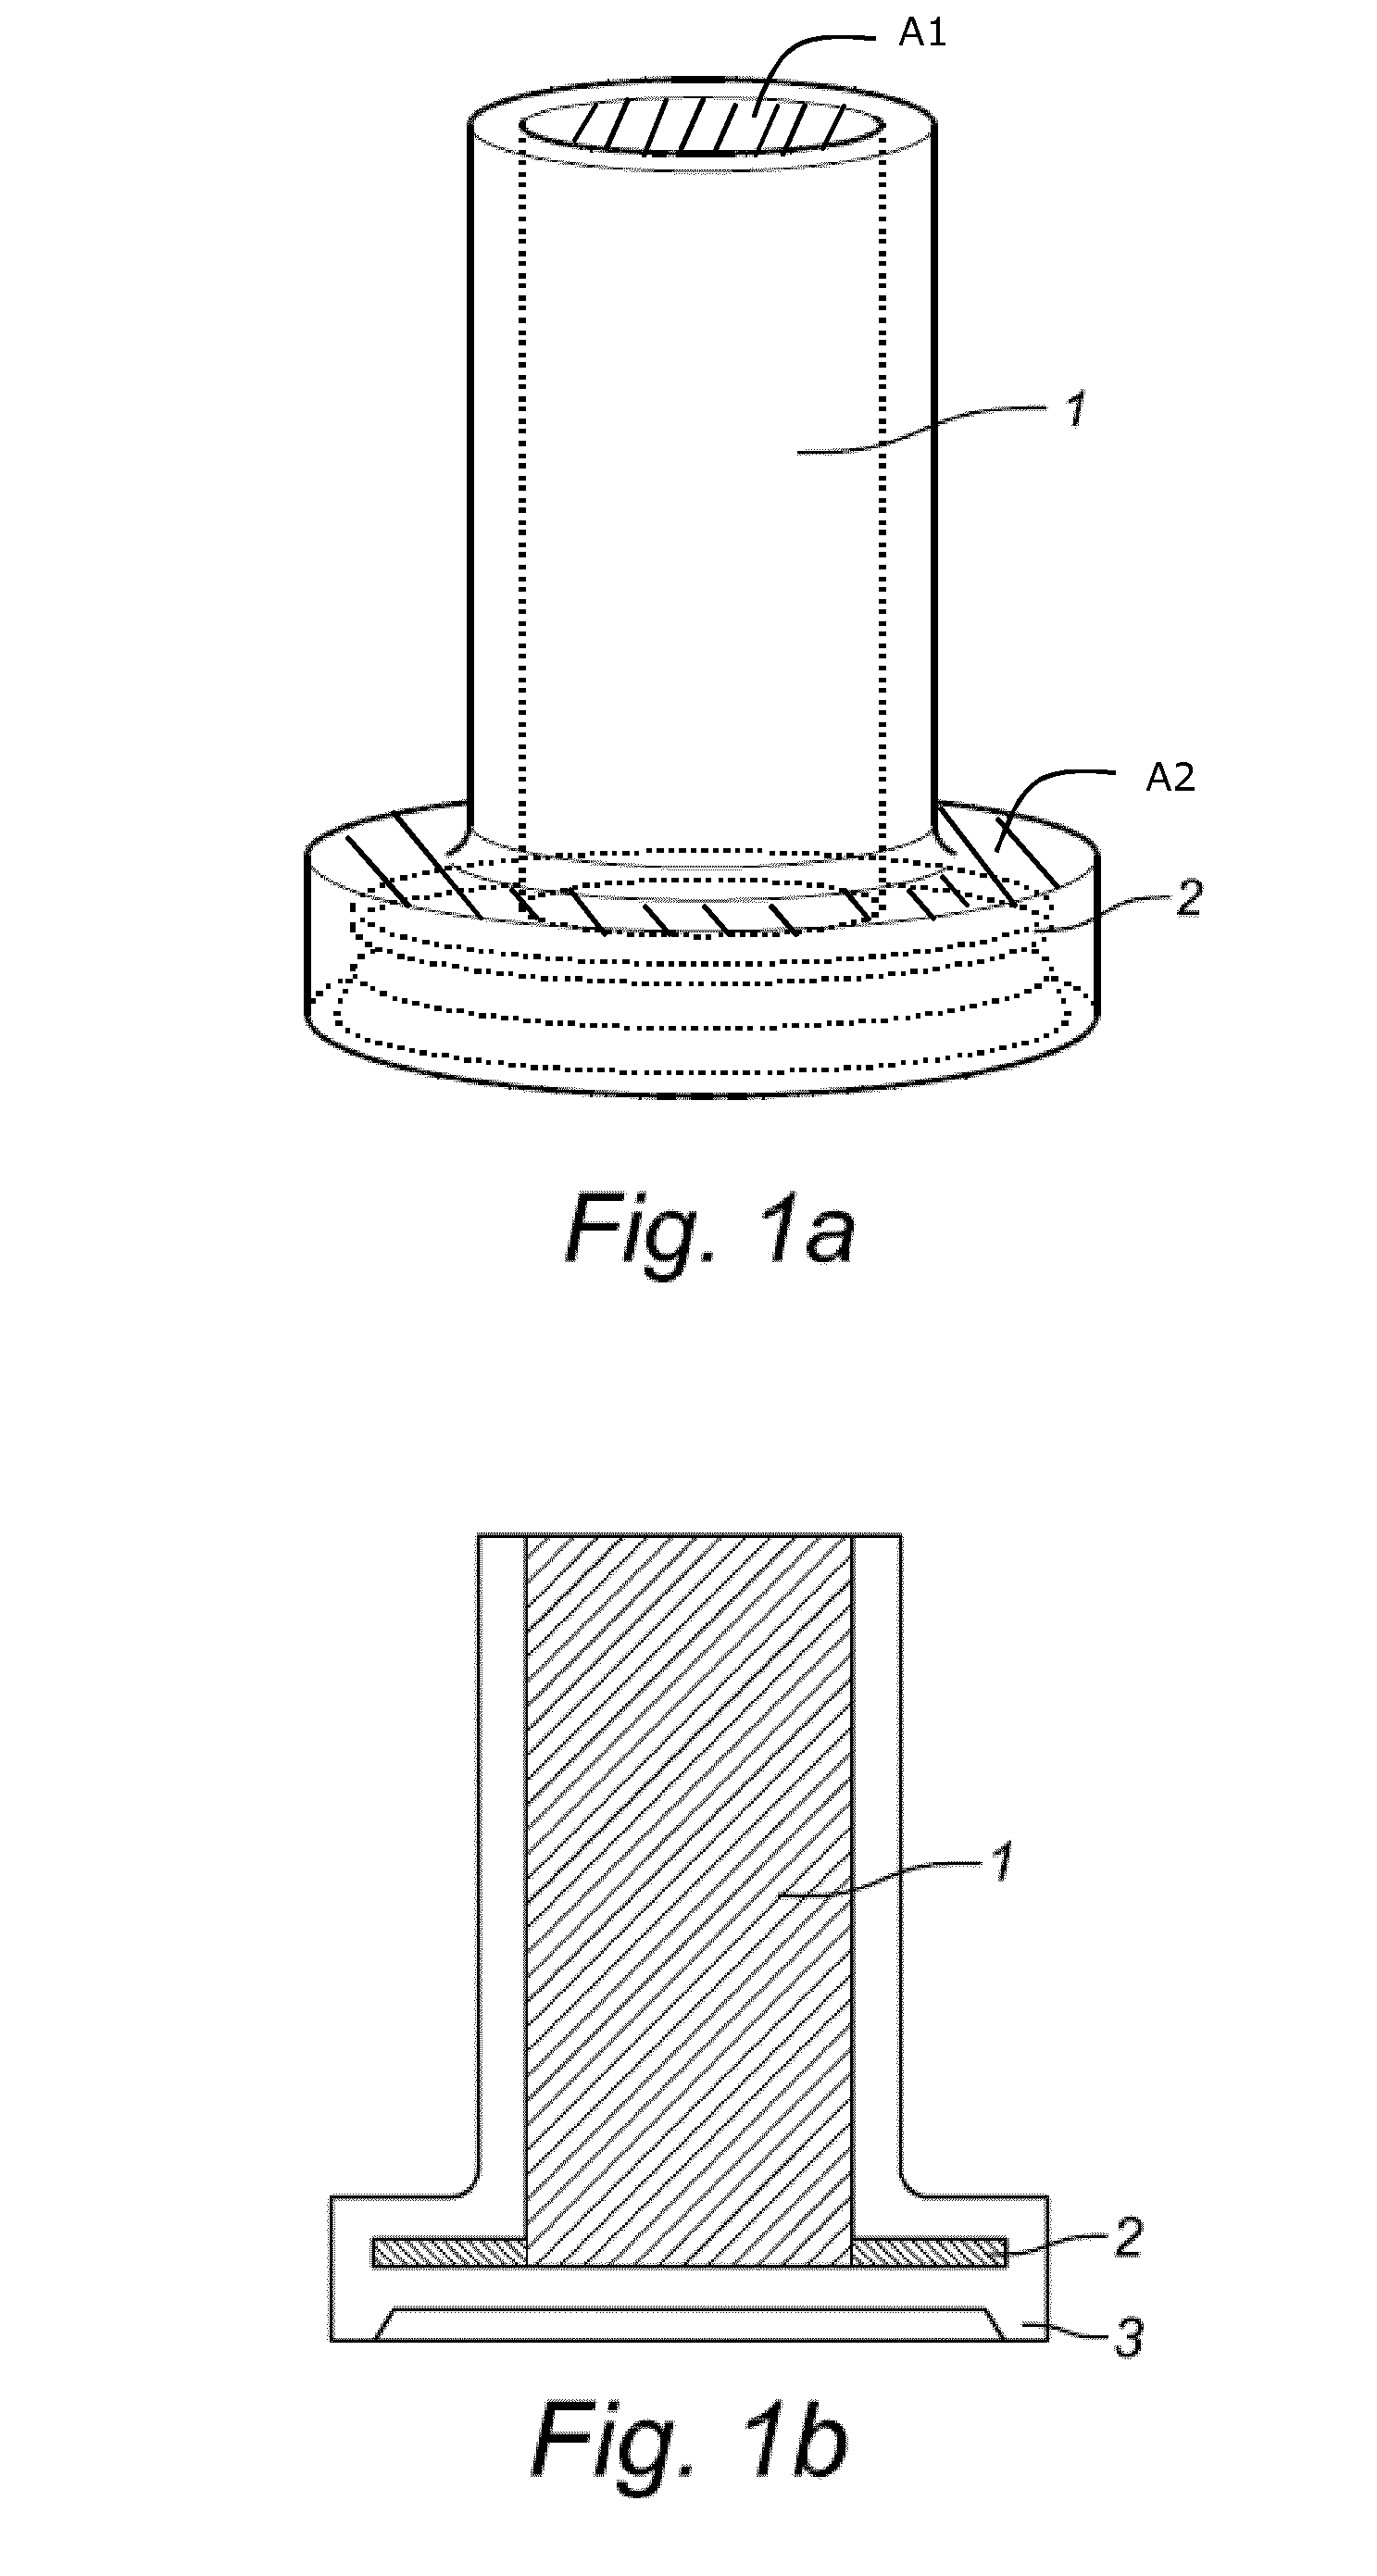 Liquid medium and sample vial for use in a method for detecting cancerous cells in a cell sample